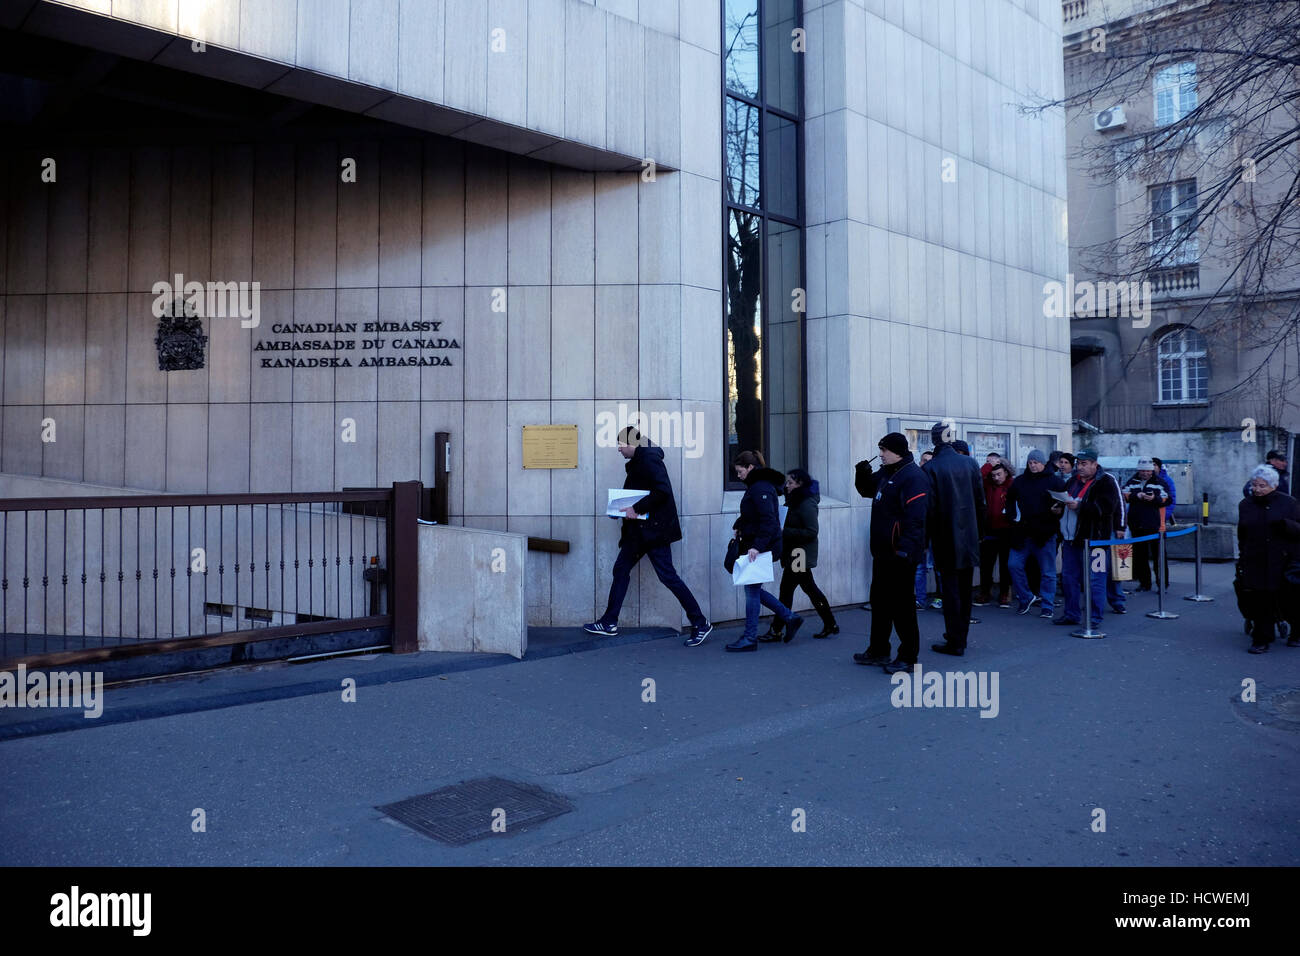 People queuing to enter the Canadian embassy in the city of Belgrade capital of the Republic of Serbia Stock Photo